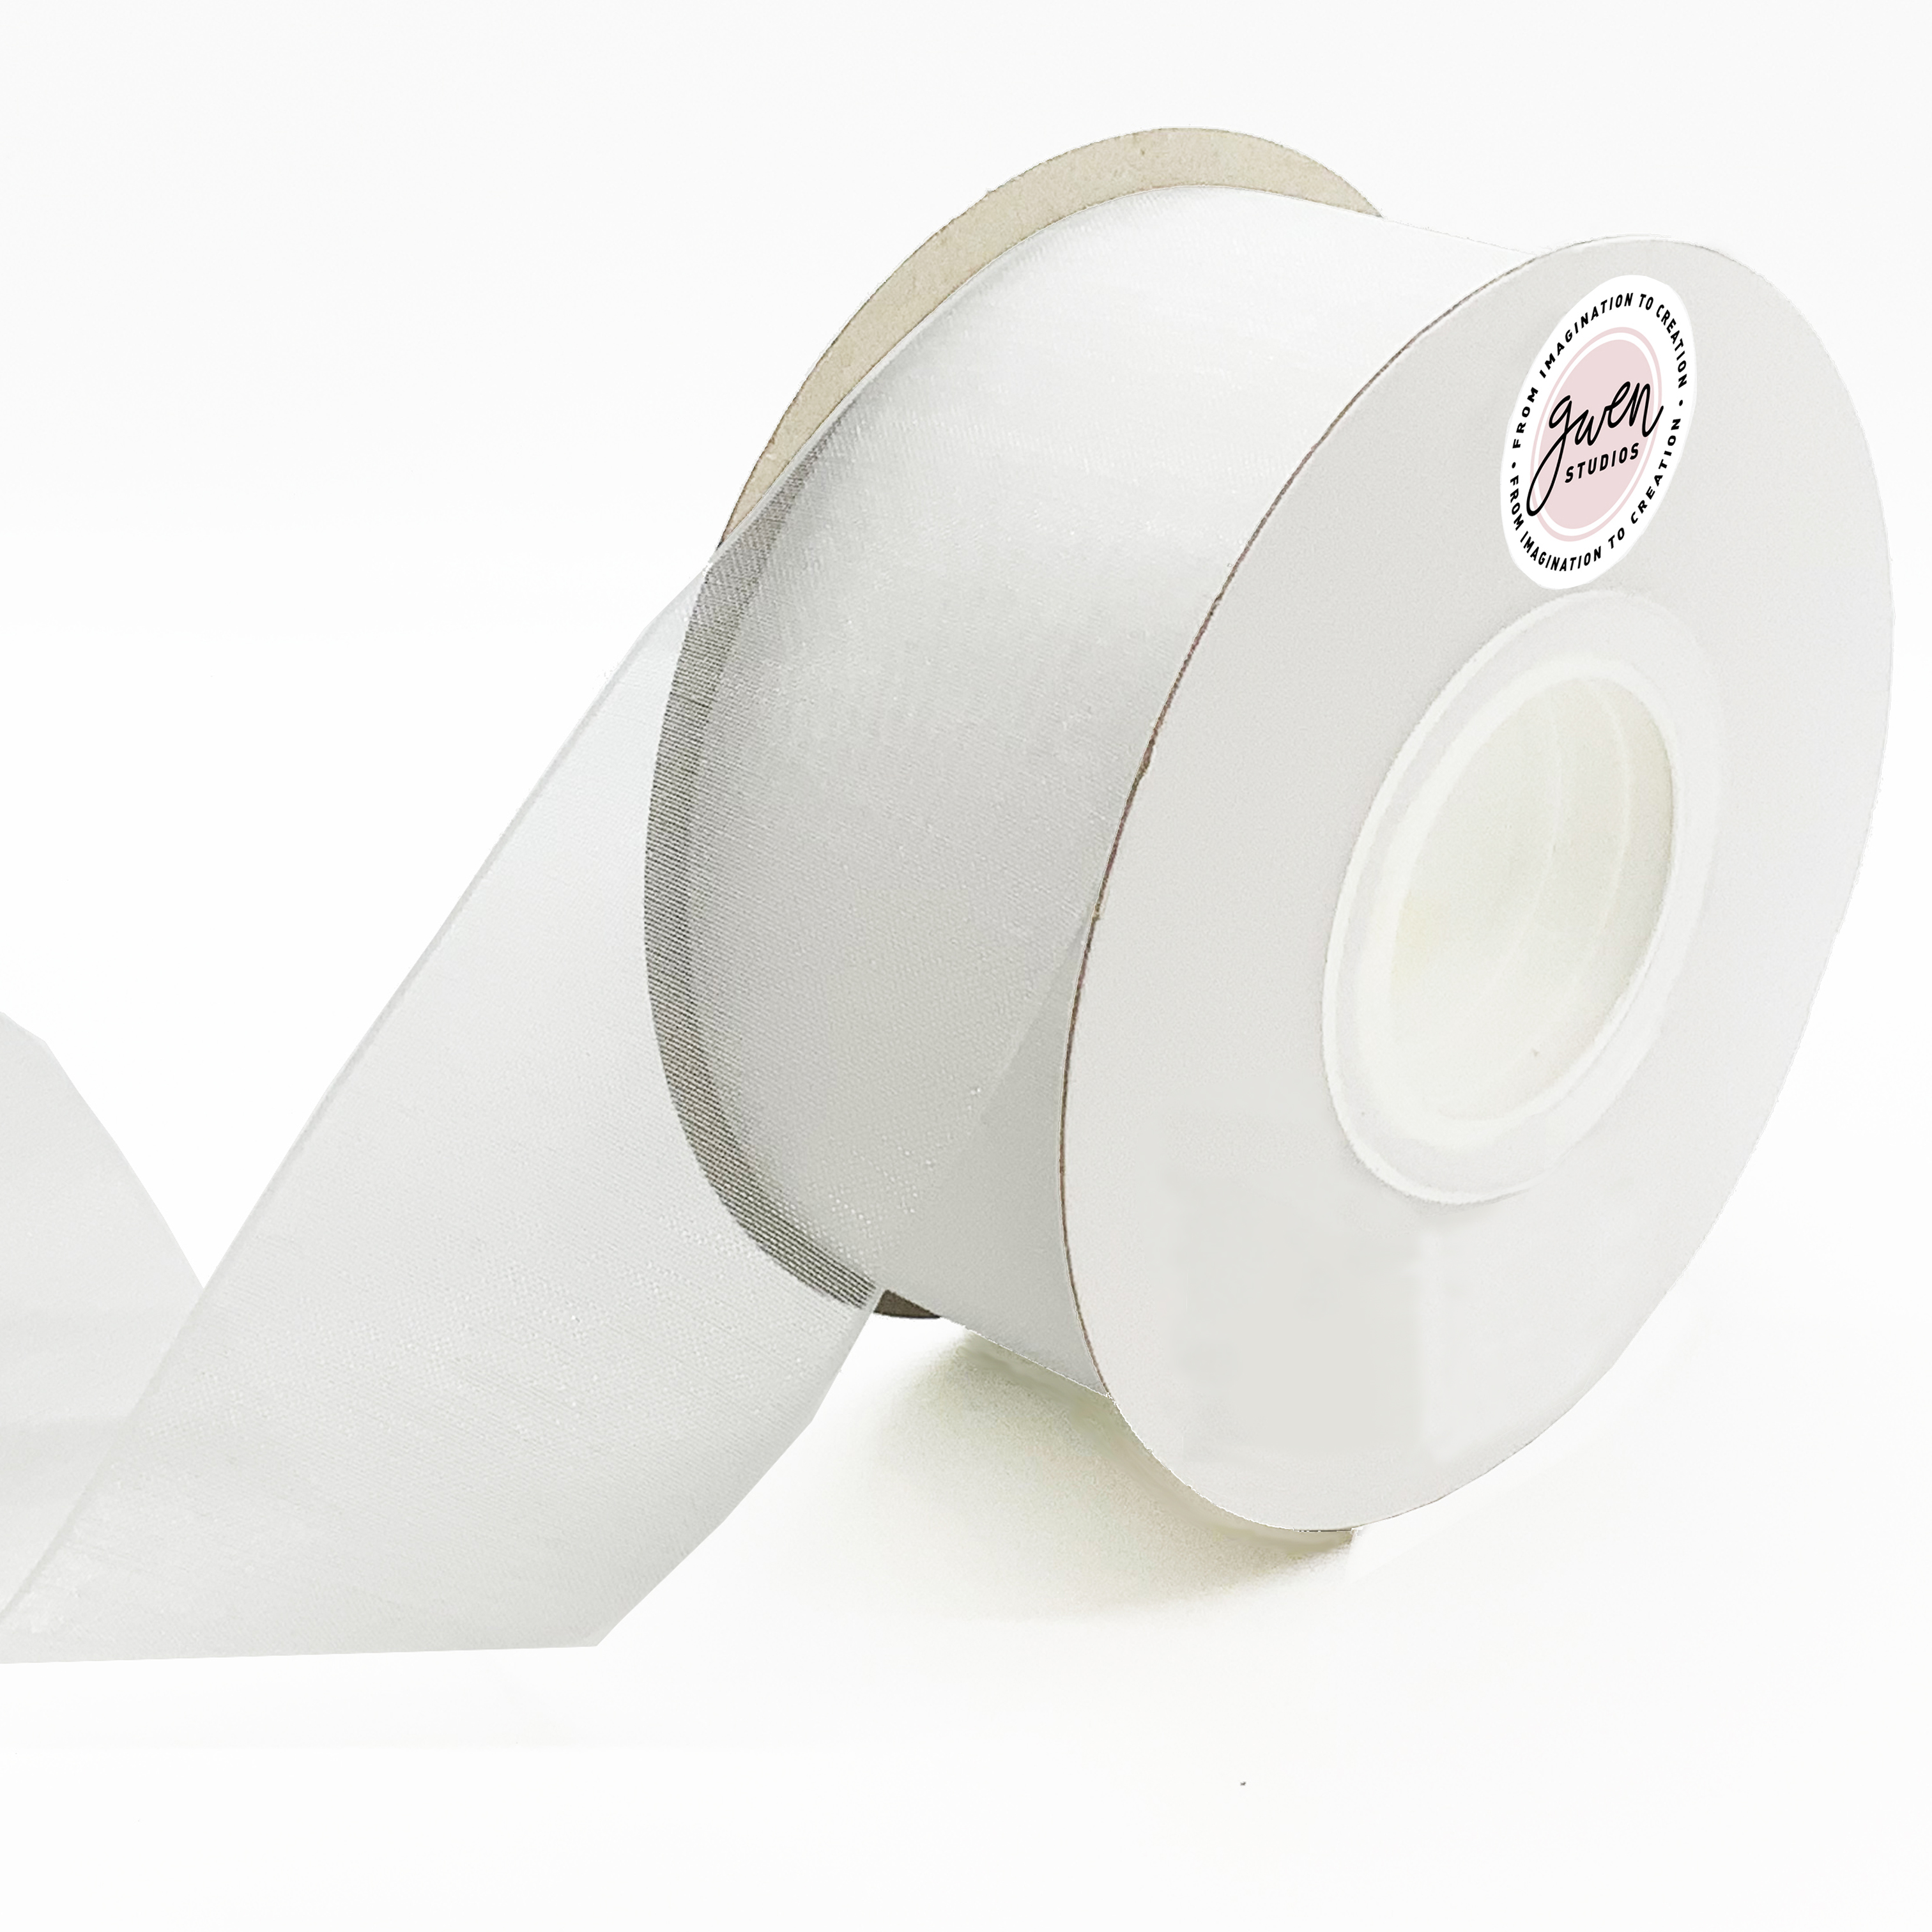 White Sheer Organza Ribbon for Crafts and Wedding, 1.5 x 50 Yards